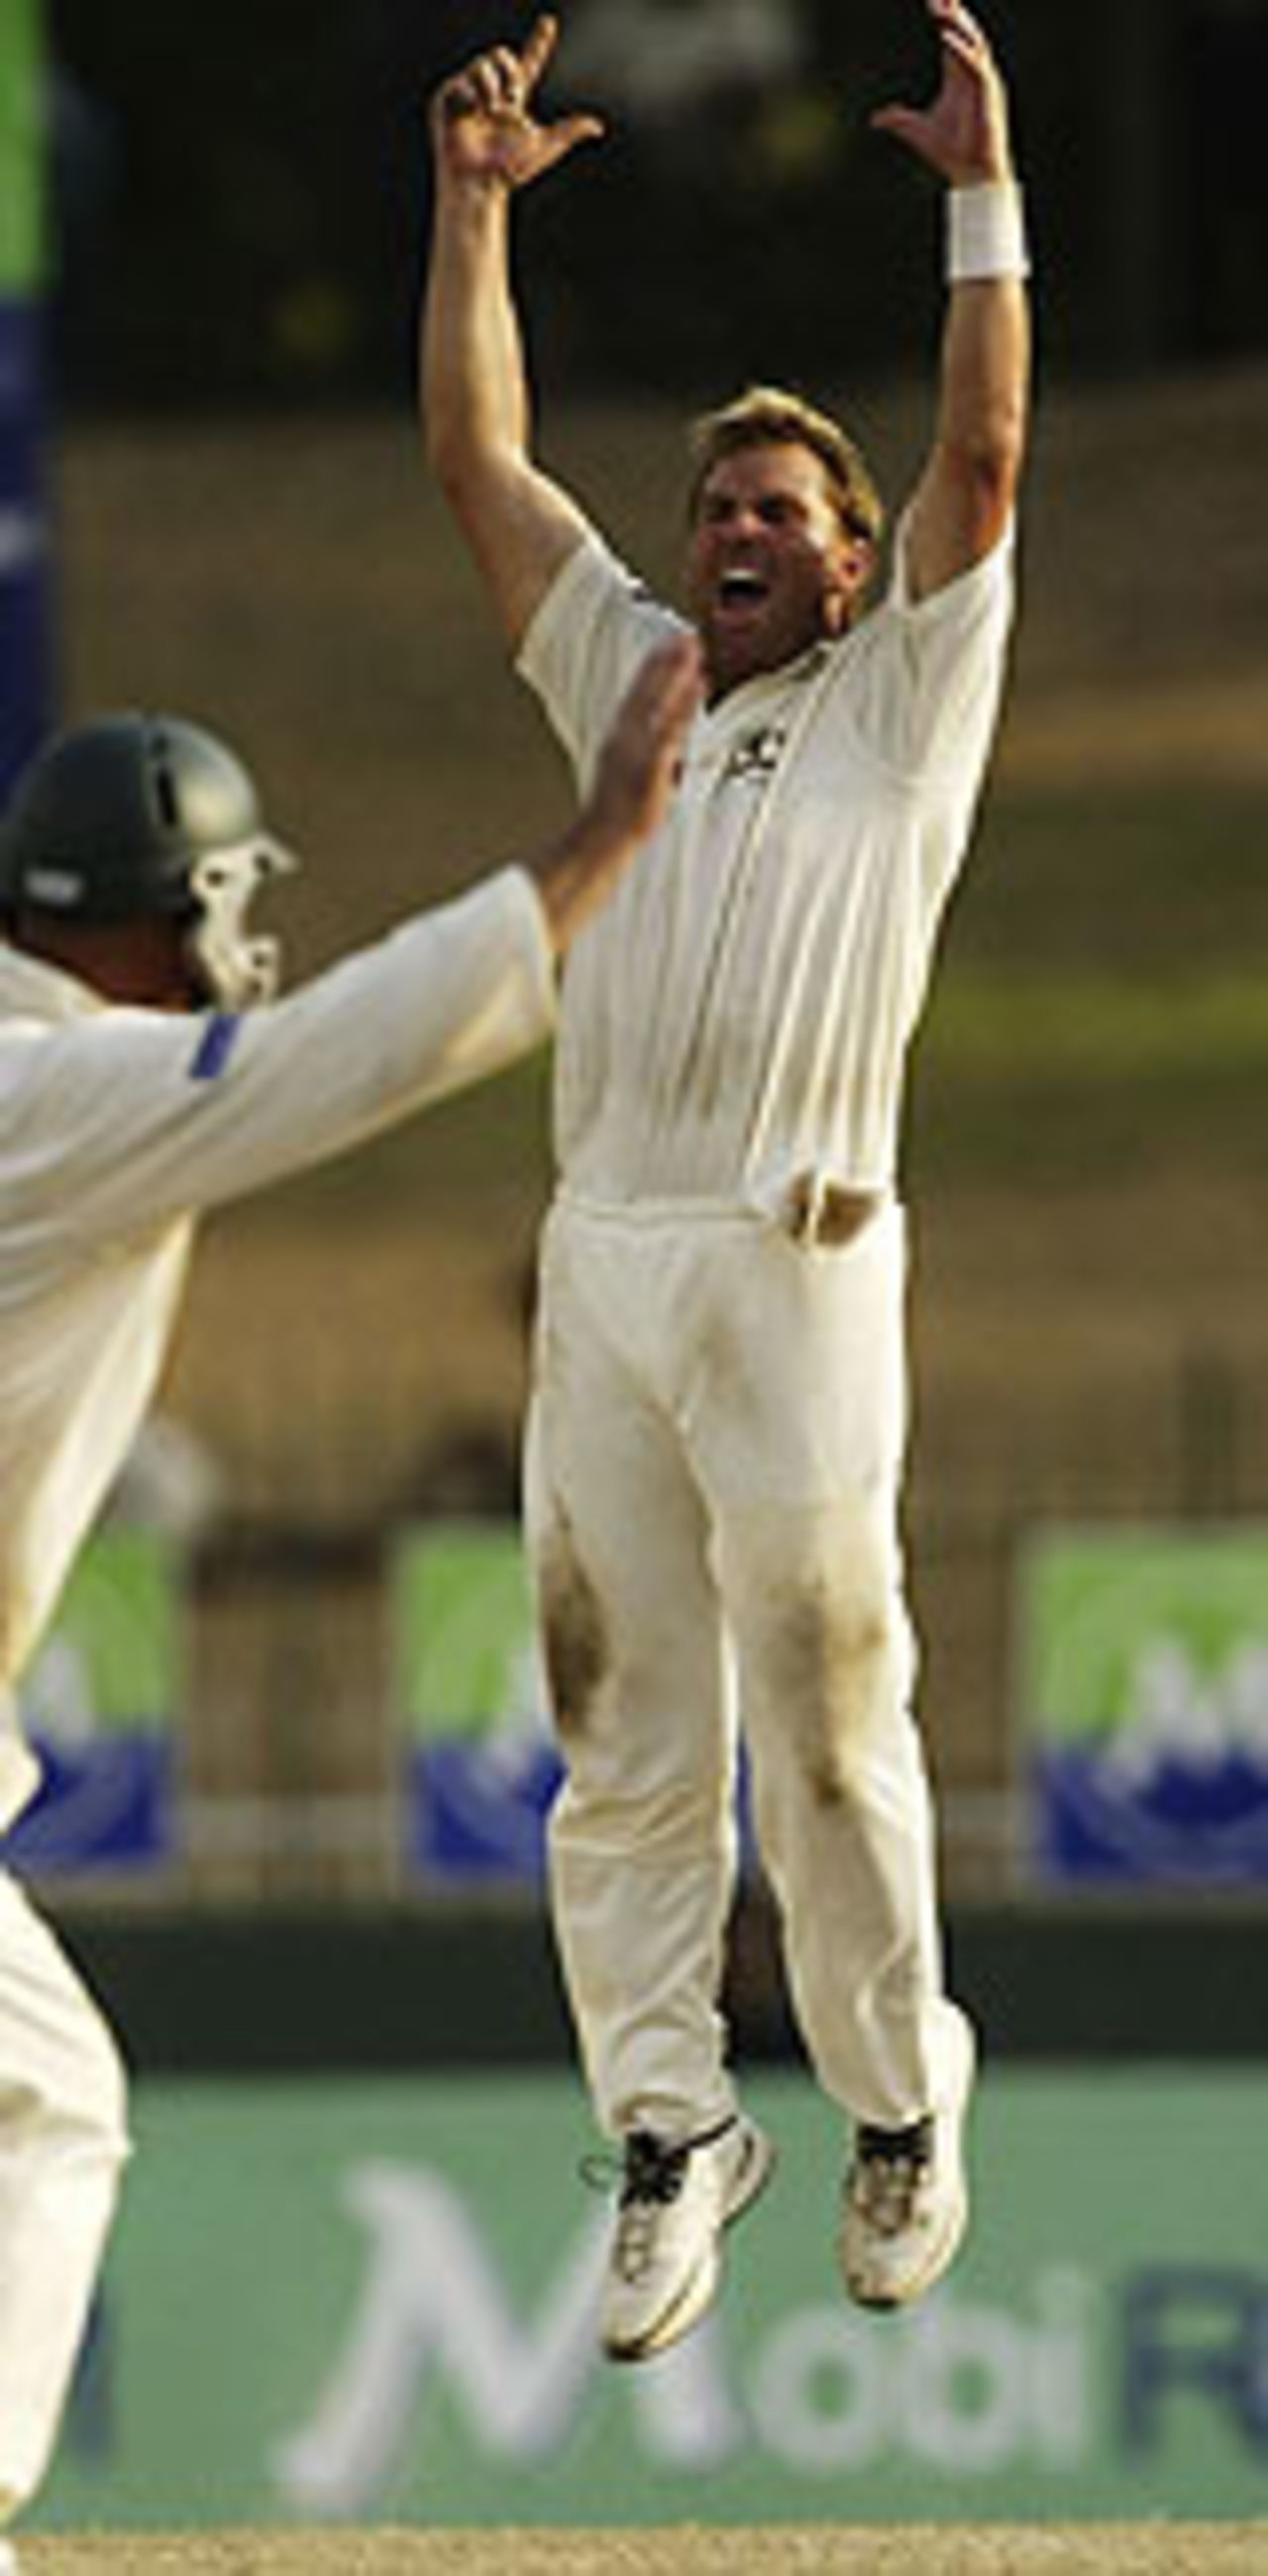 Shane Warne leaps after a wicket, Sri Lanka v Australia, 3rd Test, Colombo, 5th day, March 28, 2004